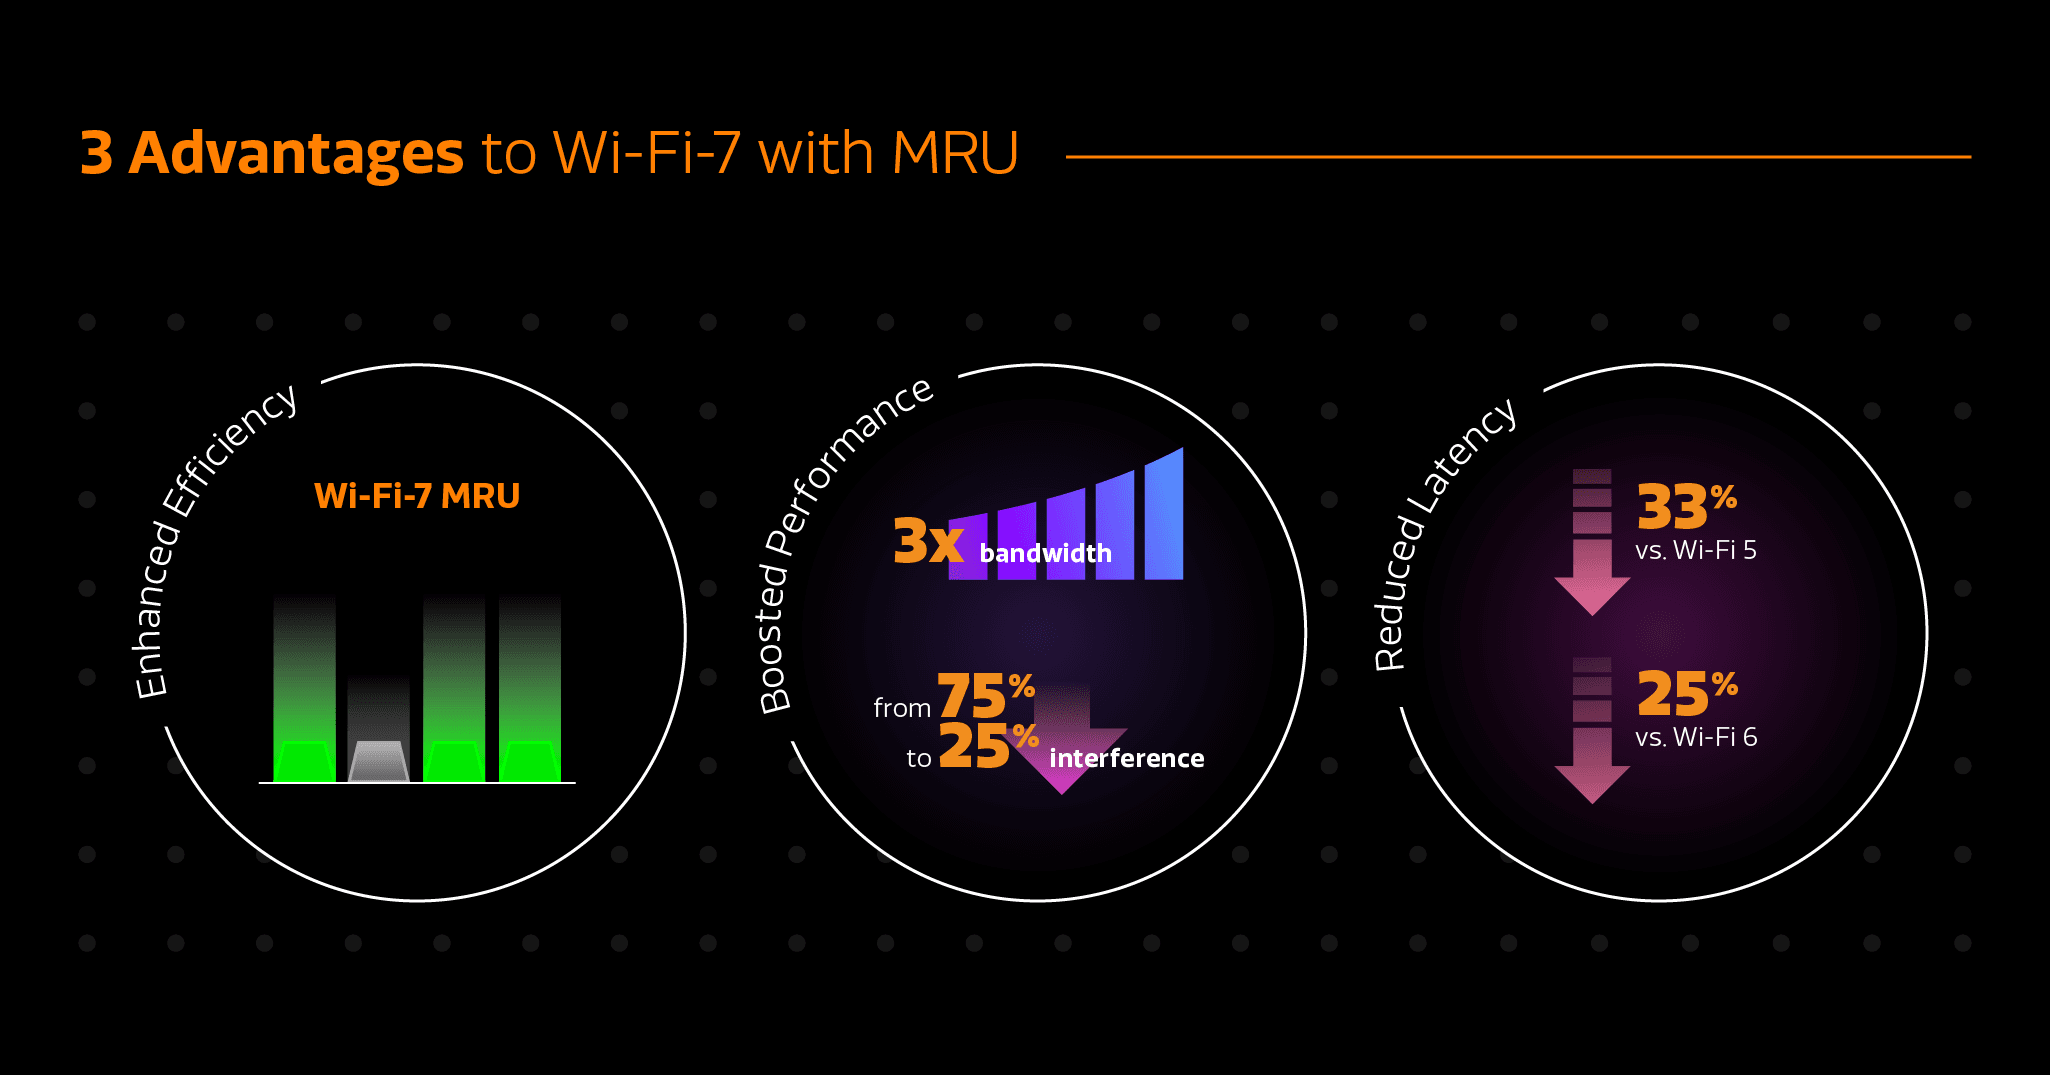 Get faster, more reliable Wi-Fi 7 connectivity with MRU and smart puncturing